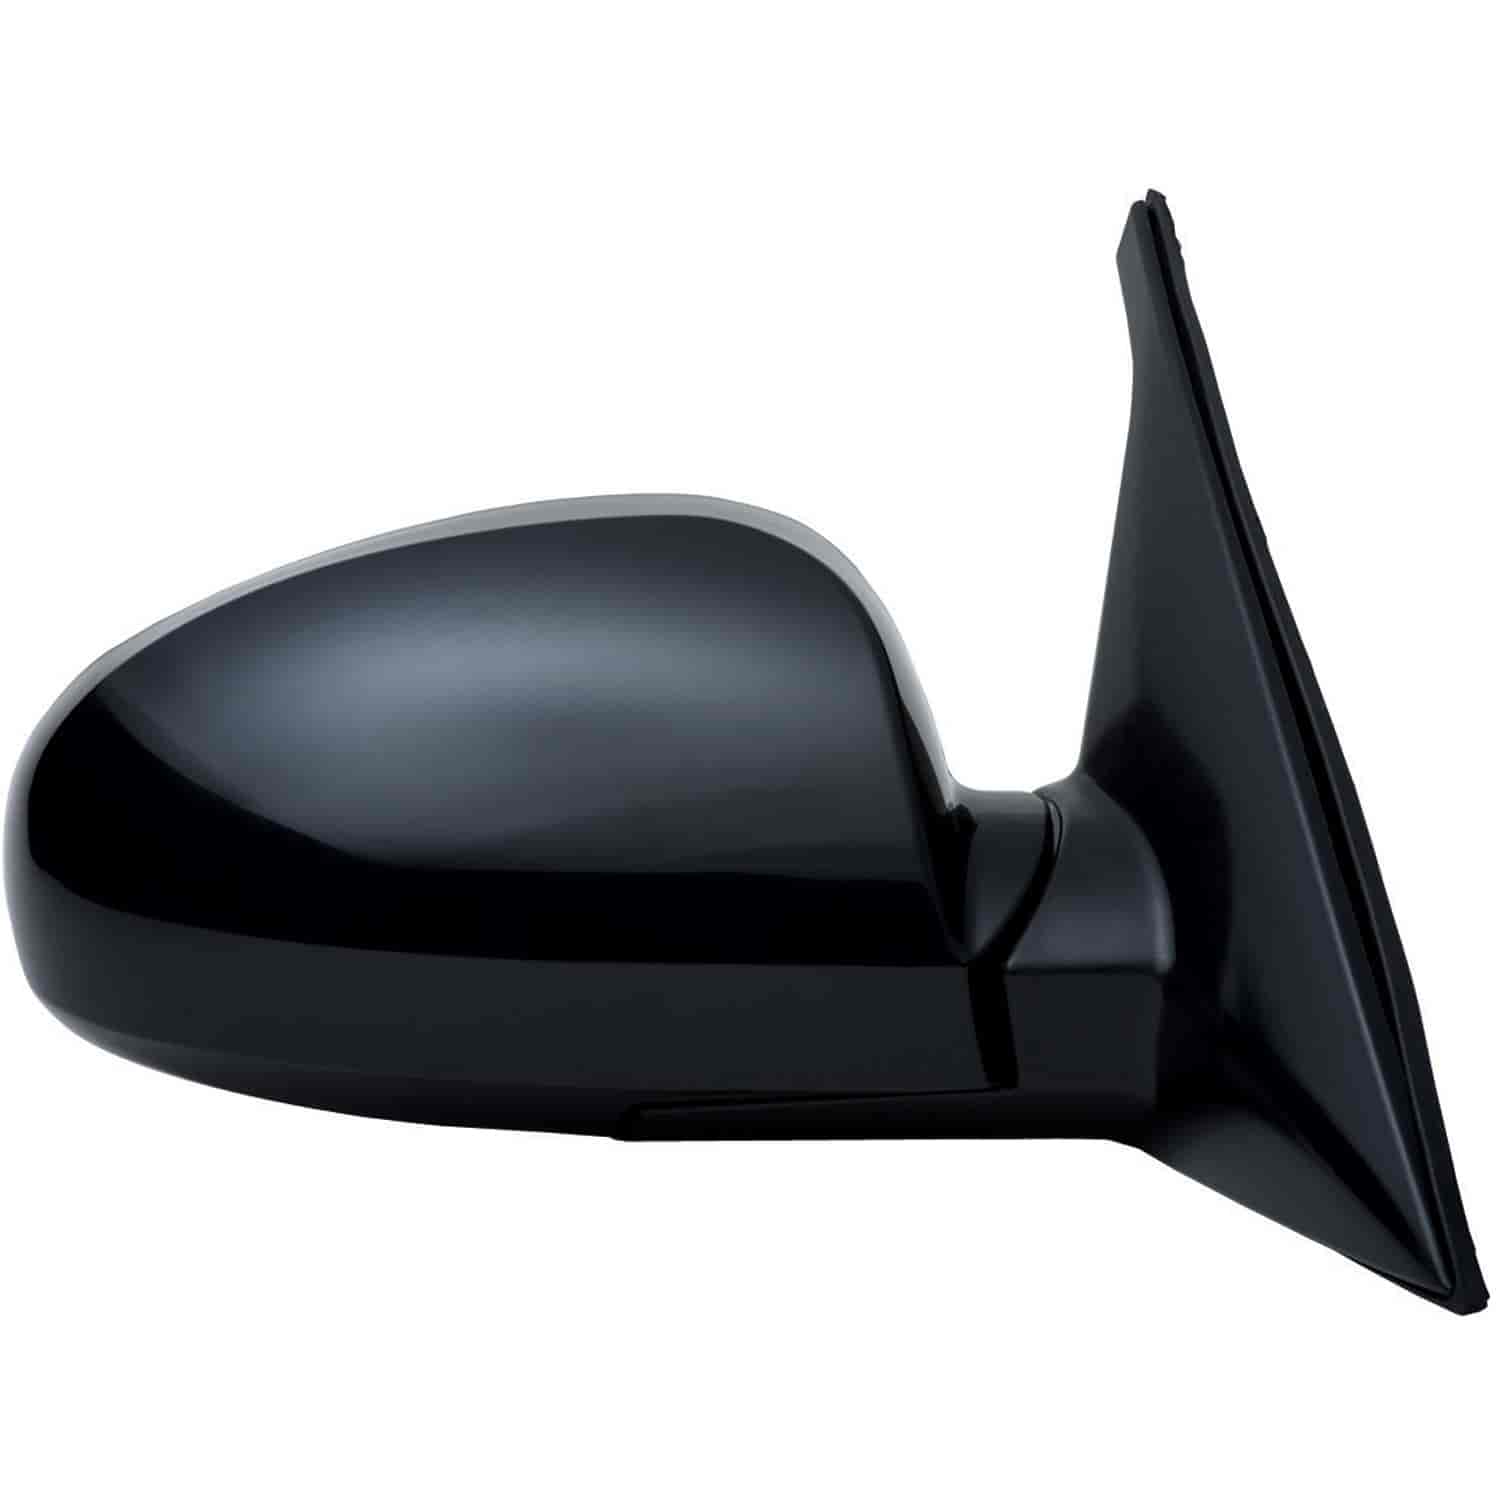 OEM Style Replacement mirror for 01-06 Kia Optima EX SE model passenger side mirror tested to fit an